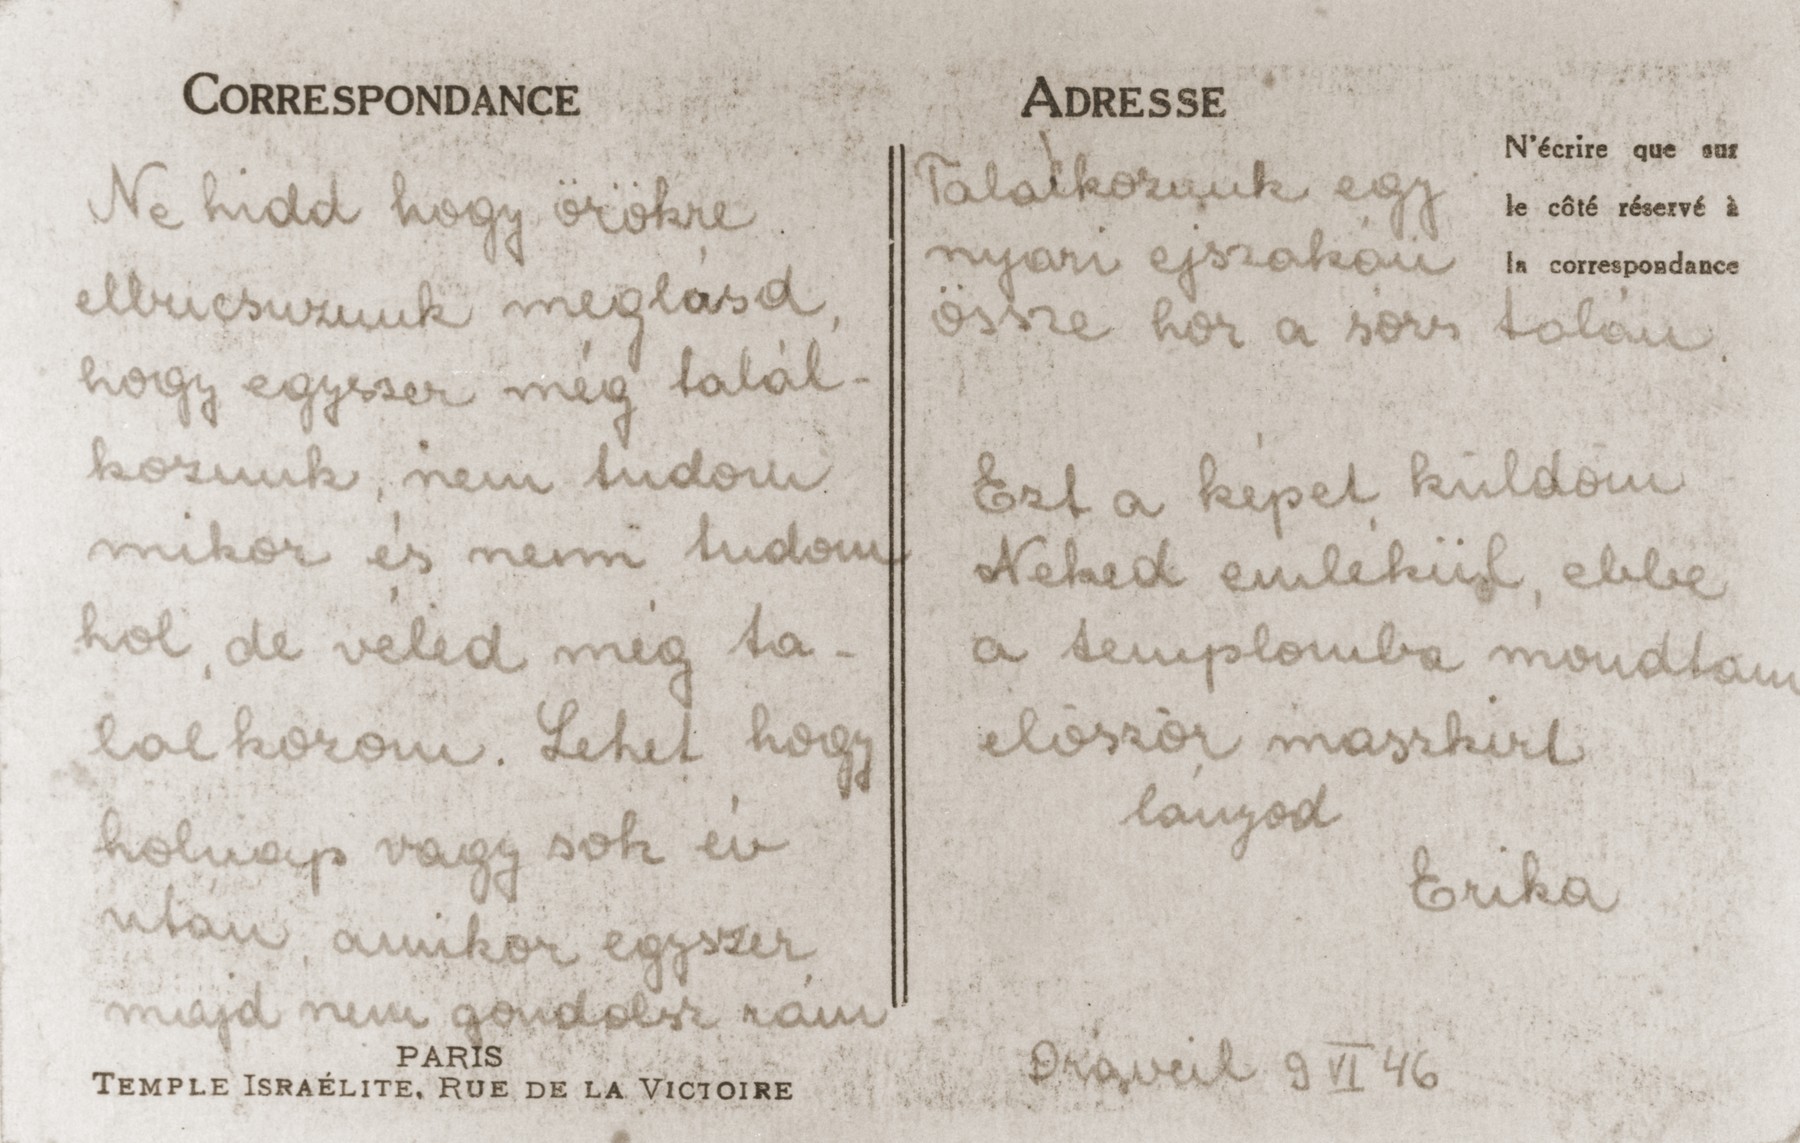 A letter written on the back of a picture postcard of the rue de la Victoire synagogue in Paris that was sent by Erika Vermes to her mother.  

In the letter, Erika Vermes writes to her mother that she stopped in this synagogue to say Yizkor (the memorial prayer for the dead) for the first time since the end of the war.